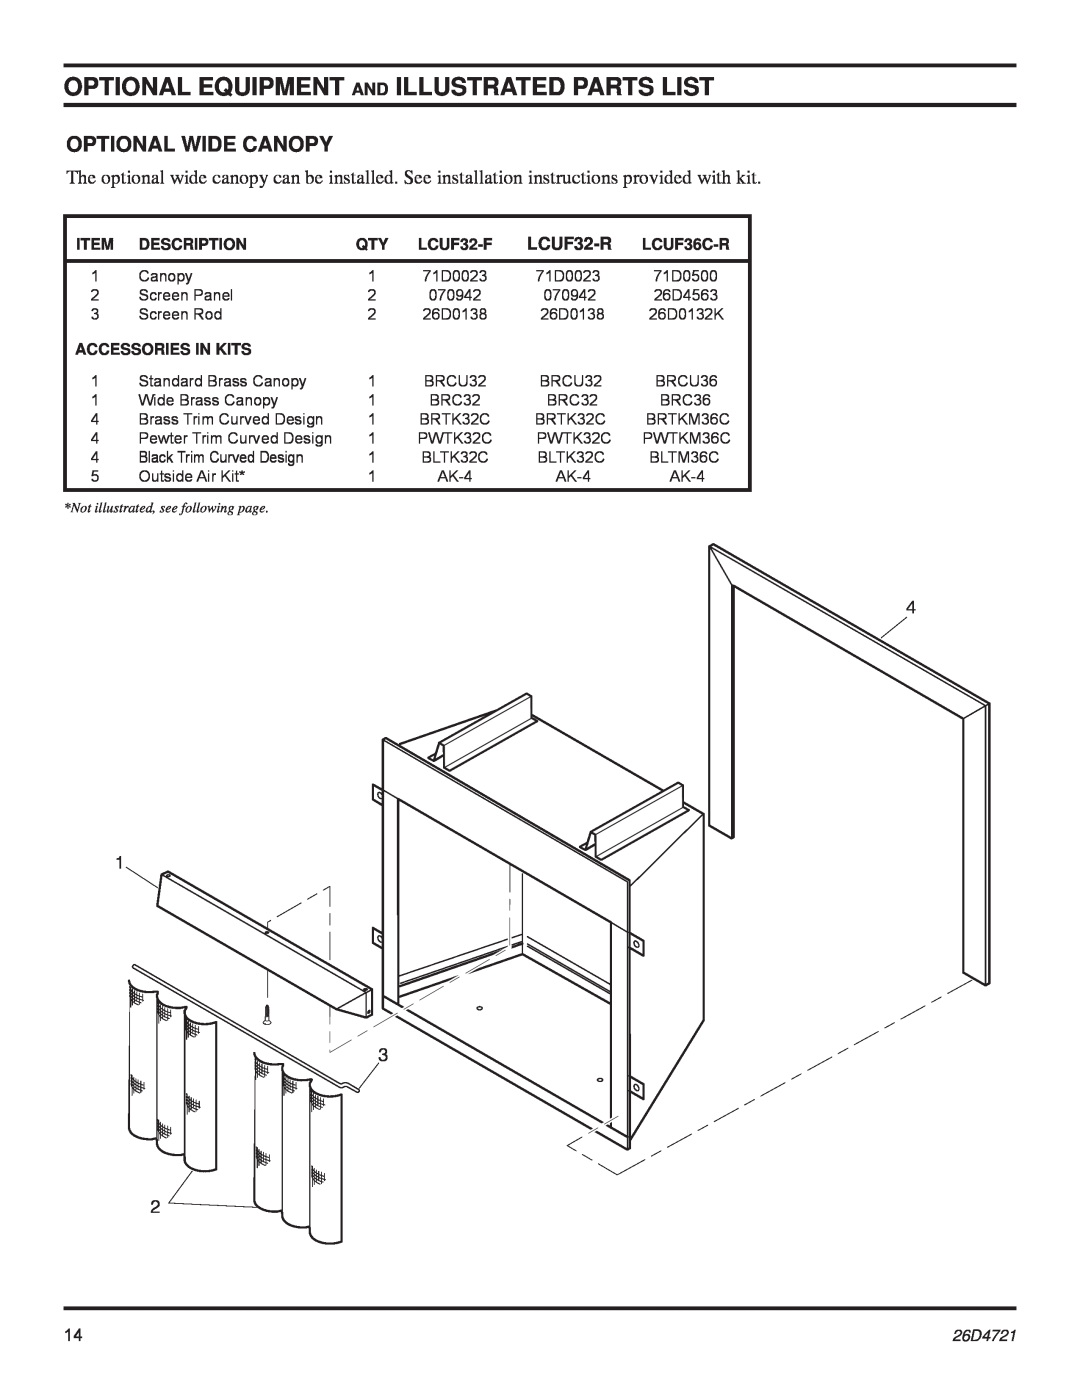 Monessen Hearth LCUF32-F dimensions Optional Equipment And Illustrated Parts List, LCUF32-R LCUF36C-R, Description 